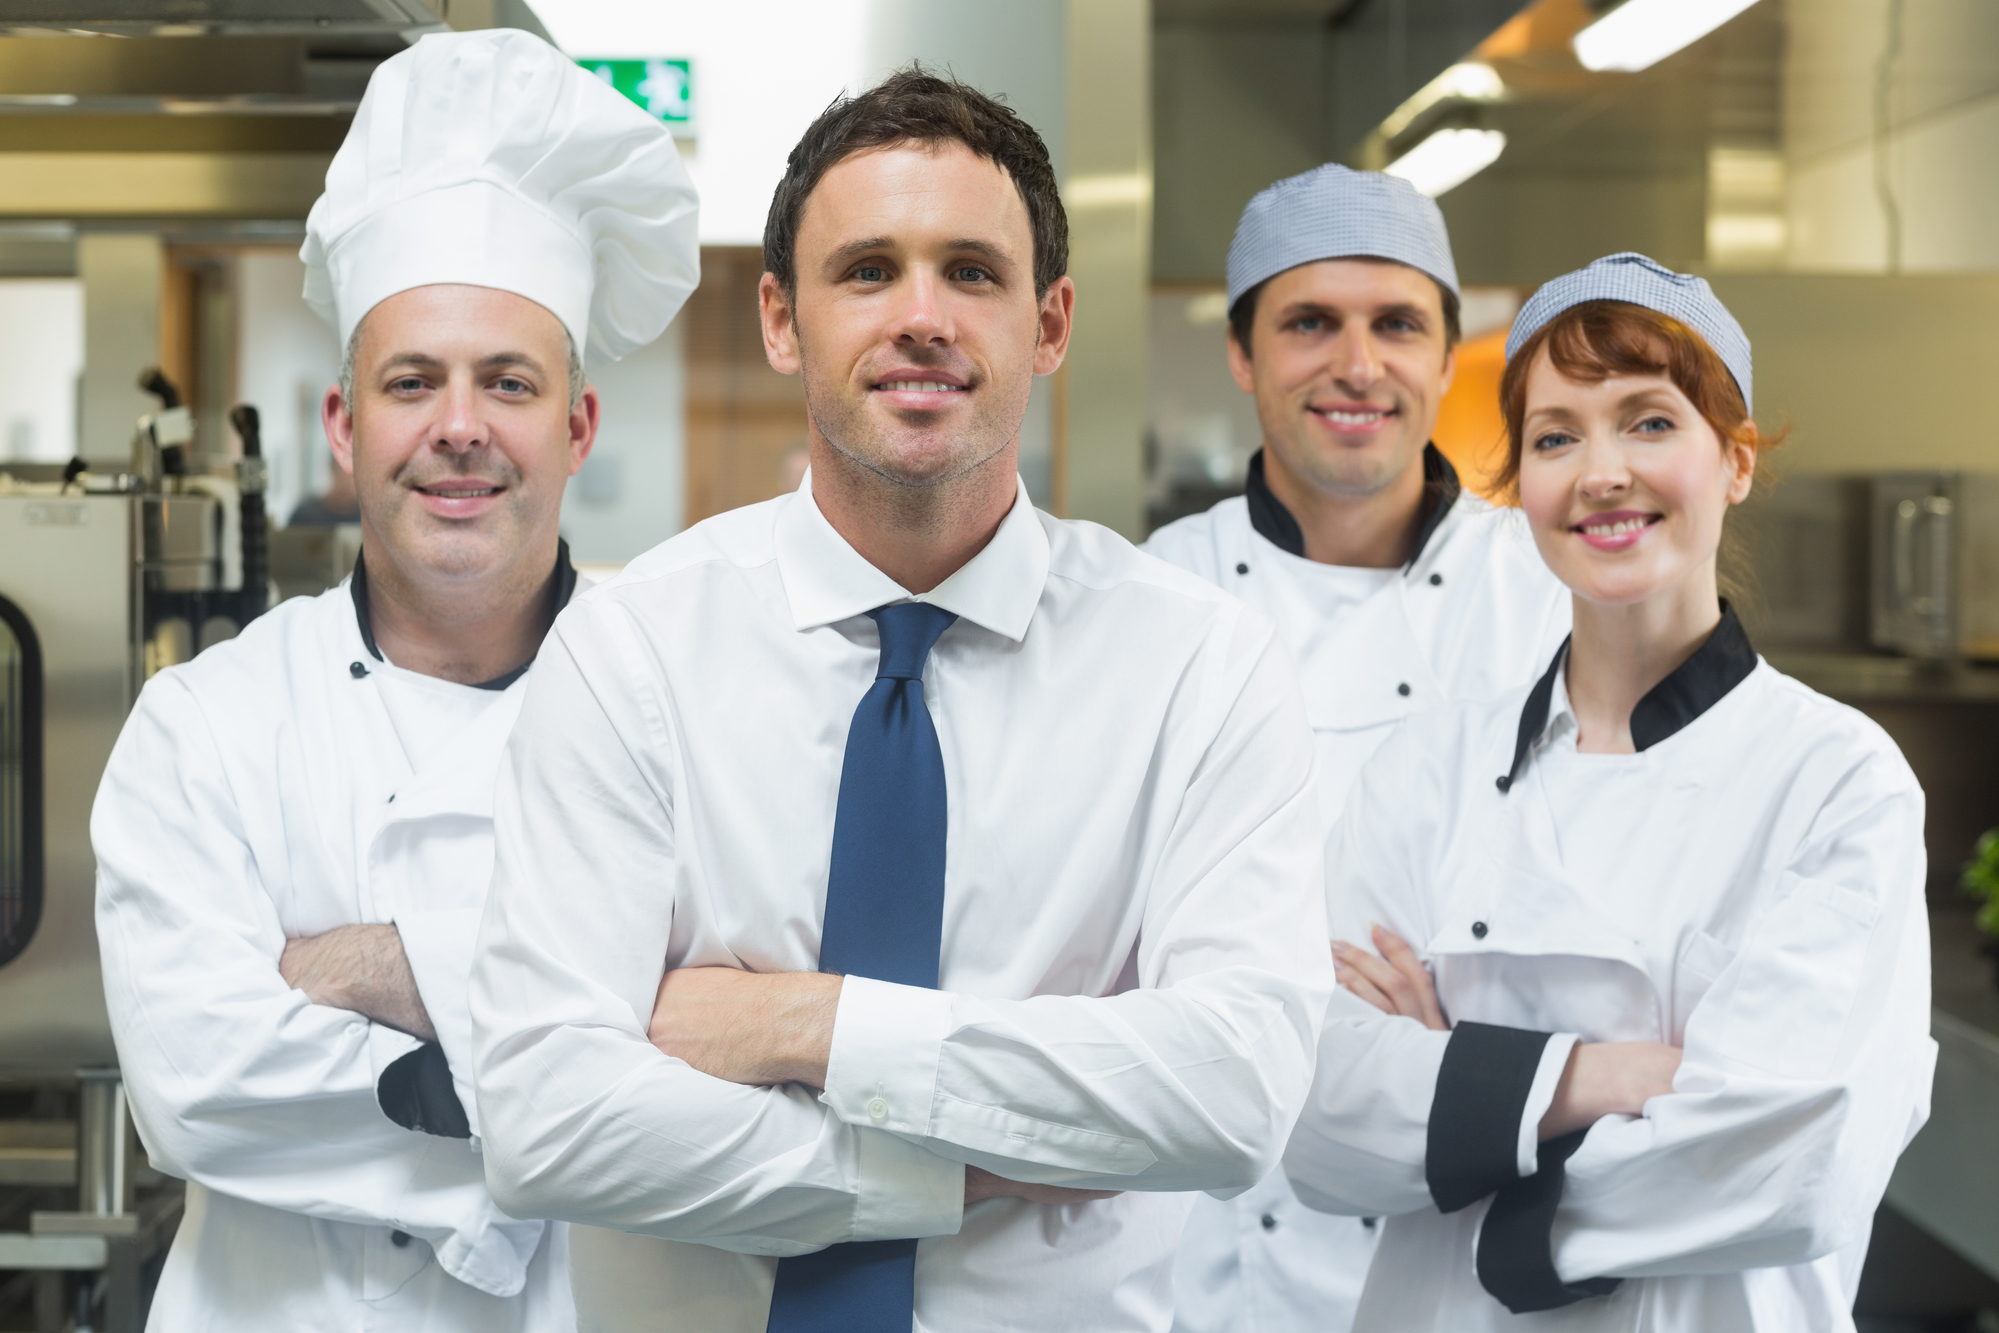  A restaurant supervisor stands with crossed arms in front of three smiling chefs.